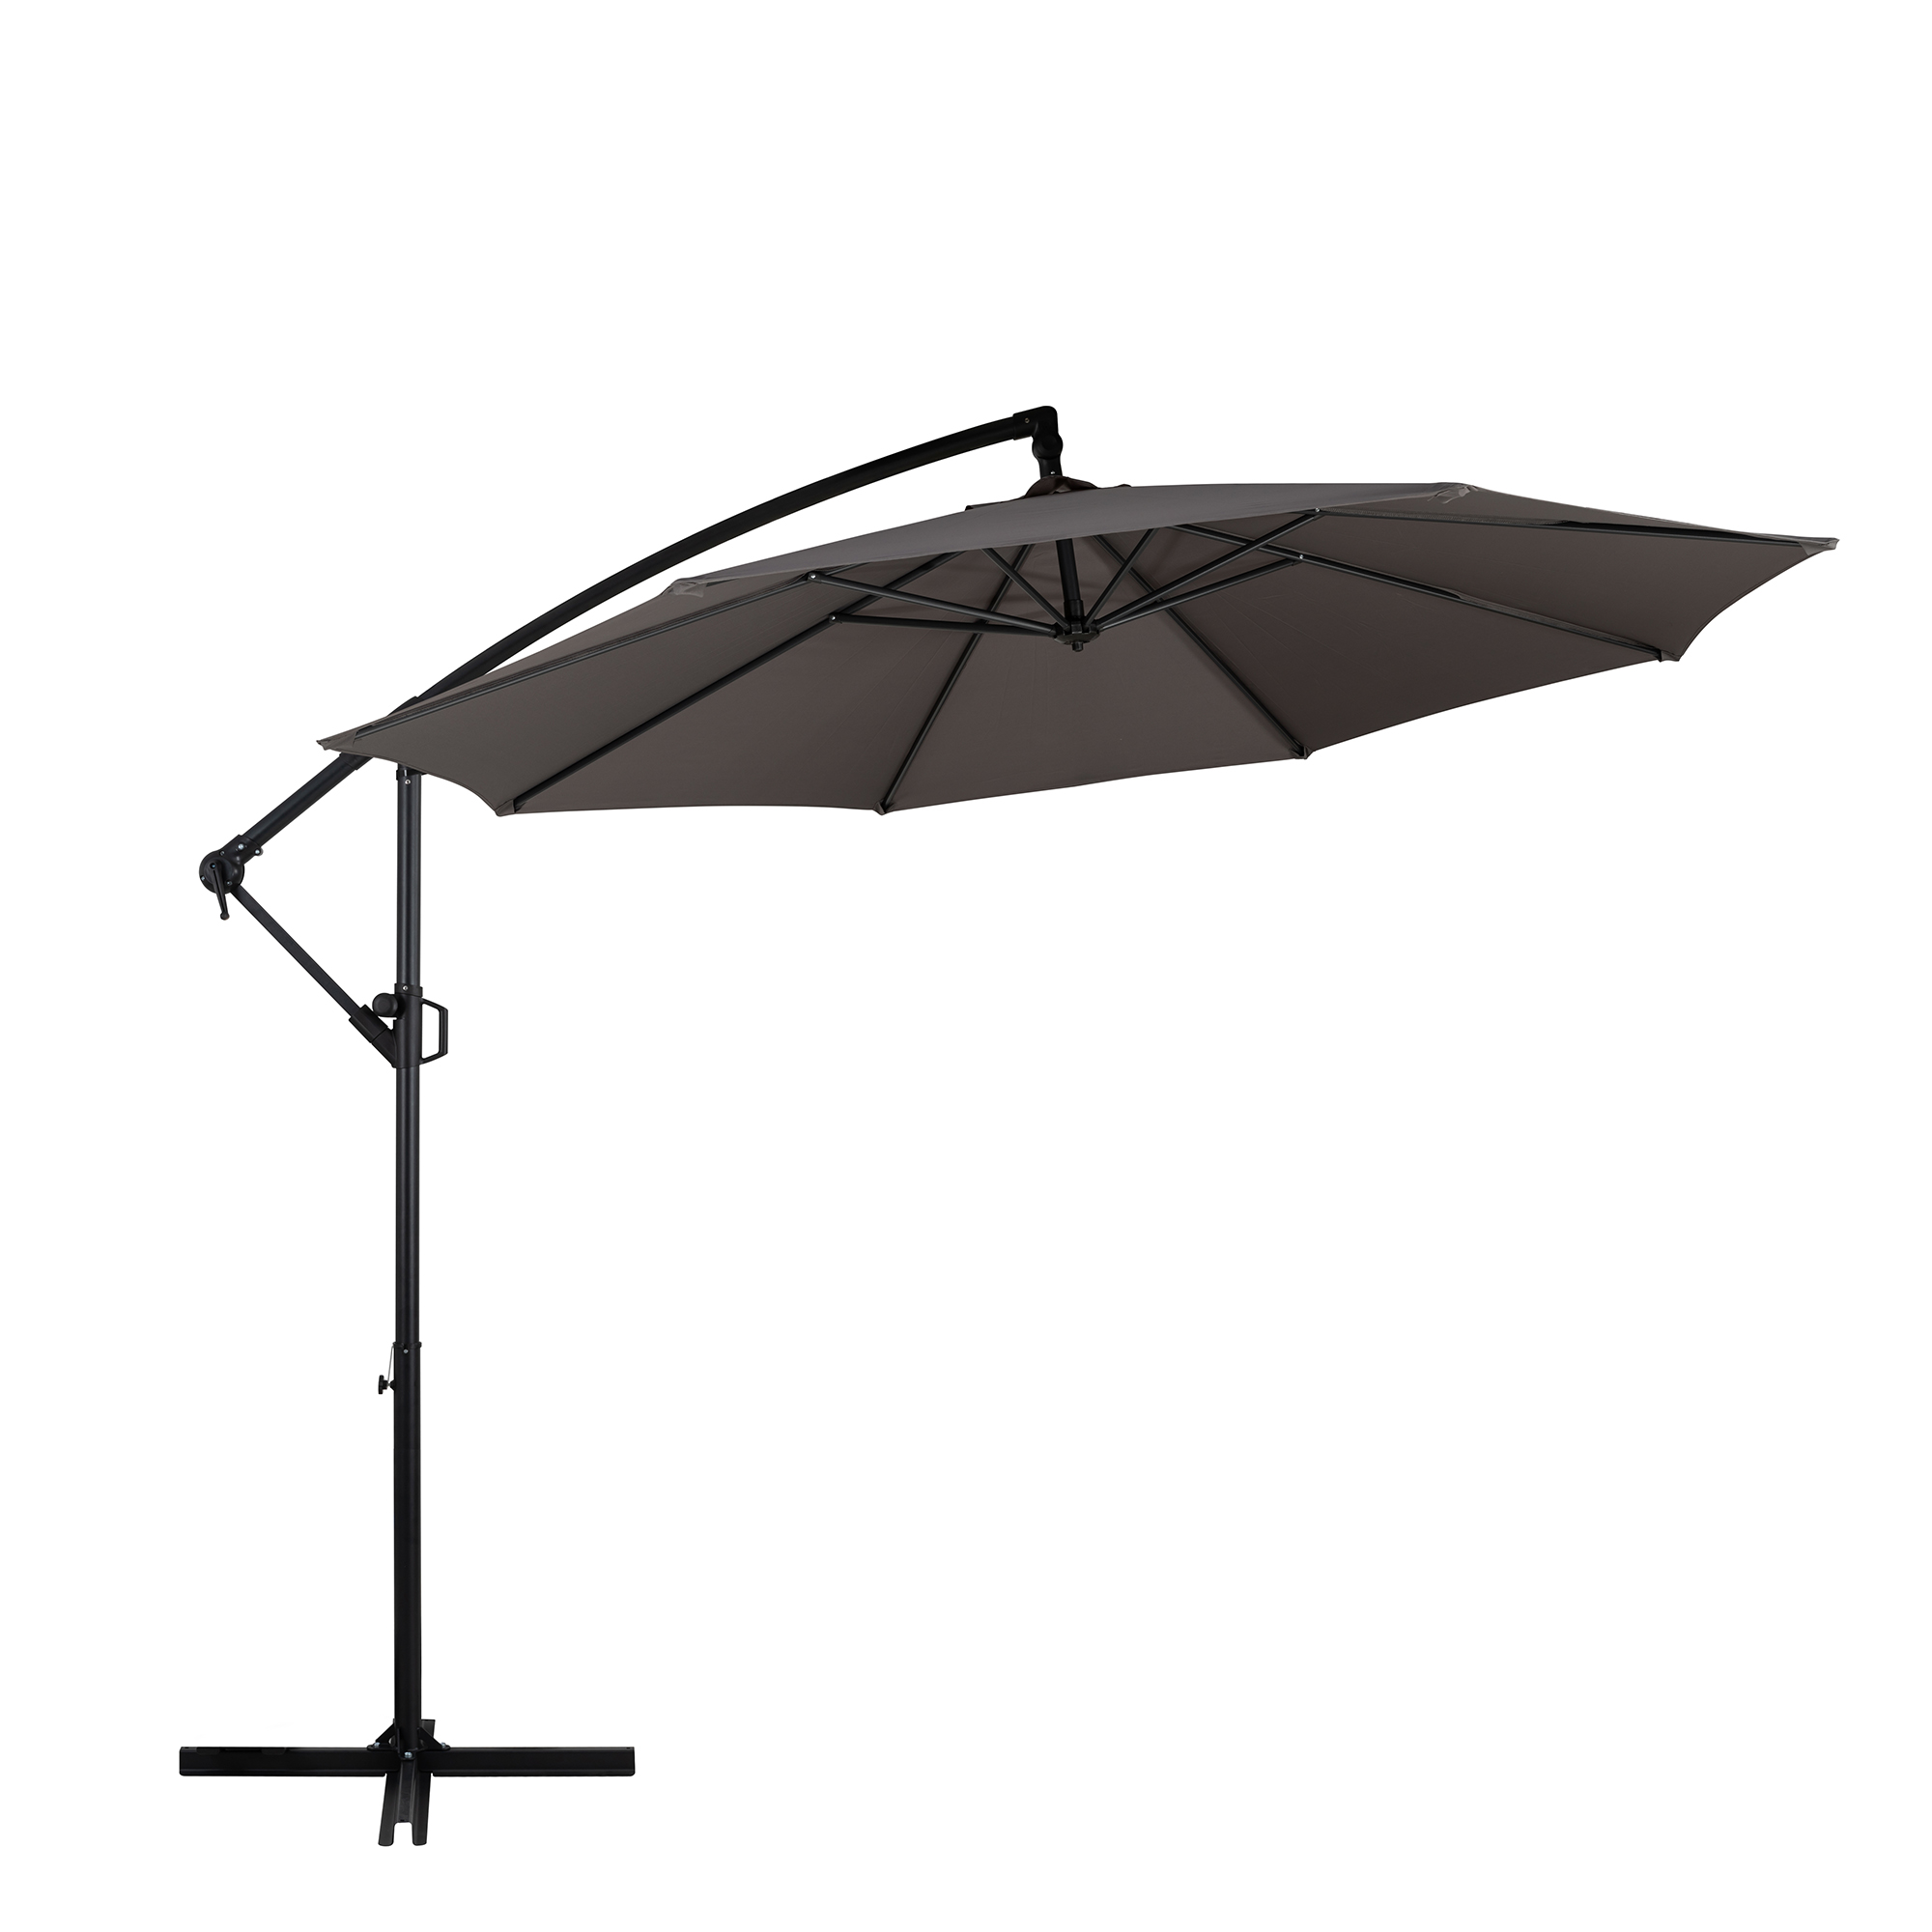 Walsunny Patio Offset Umbrella Easy Tilt Adjustment,Crank and Cross Base, Outdoor Cantilever Hanging Umbrella with 8 Ribs Dark Gray - image 5 of 7